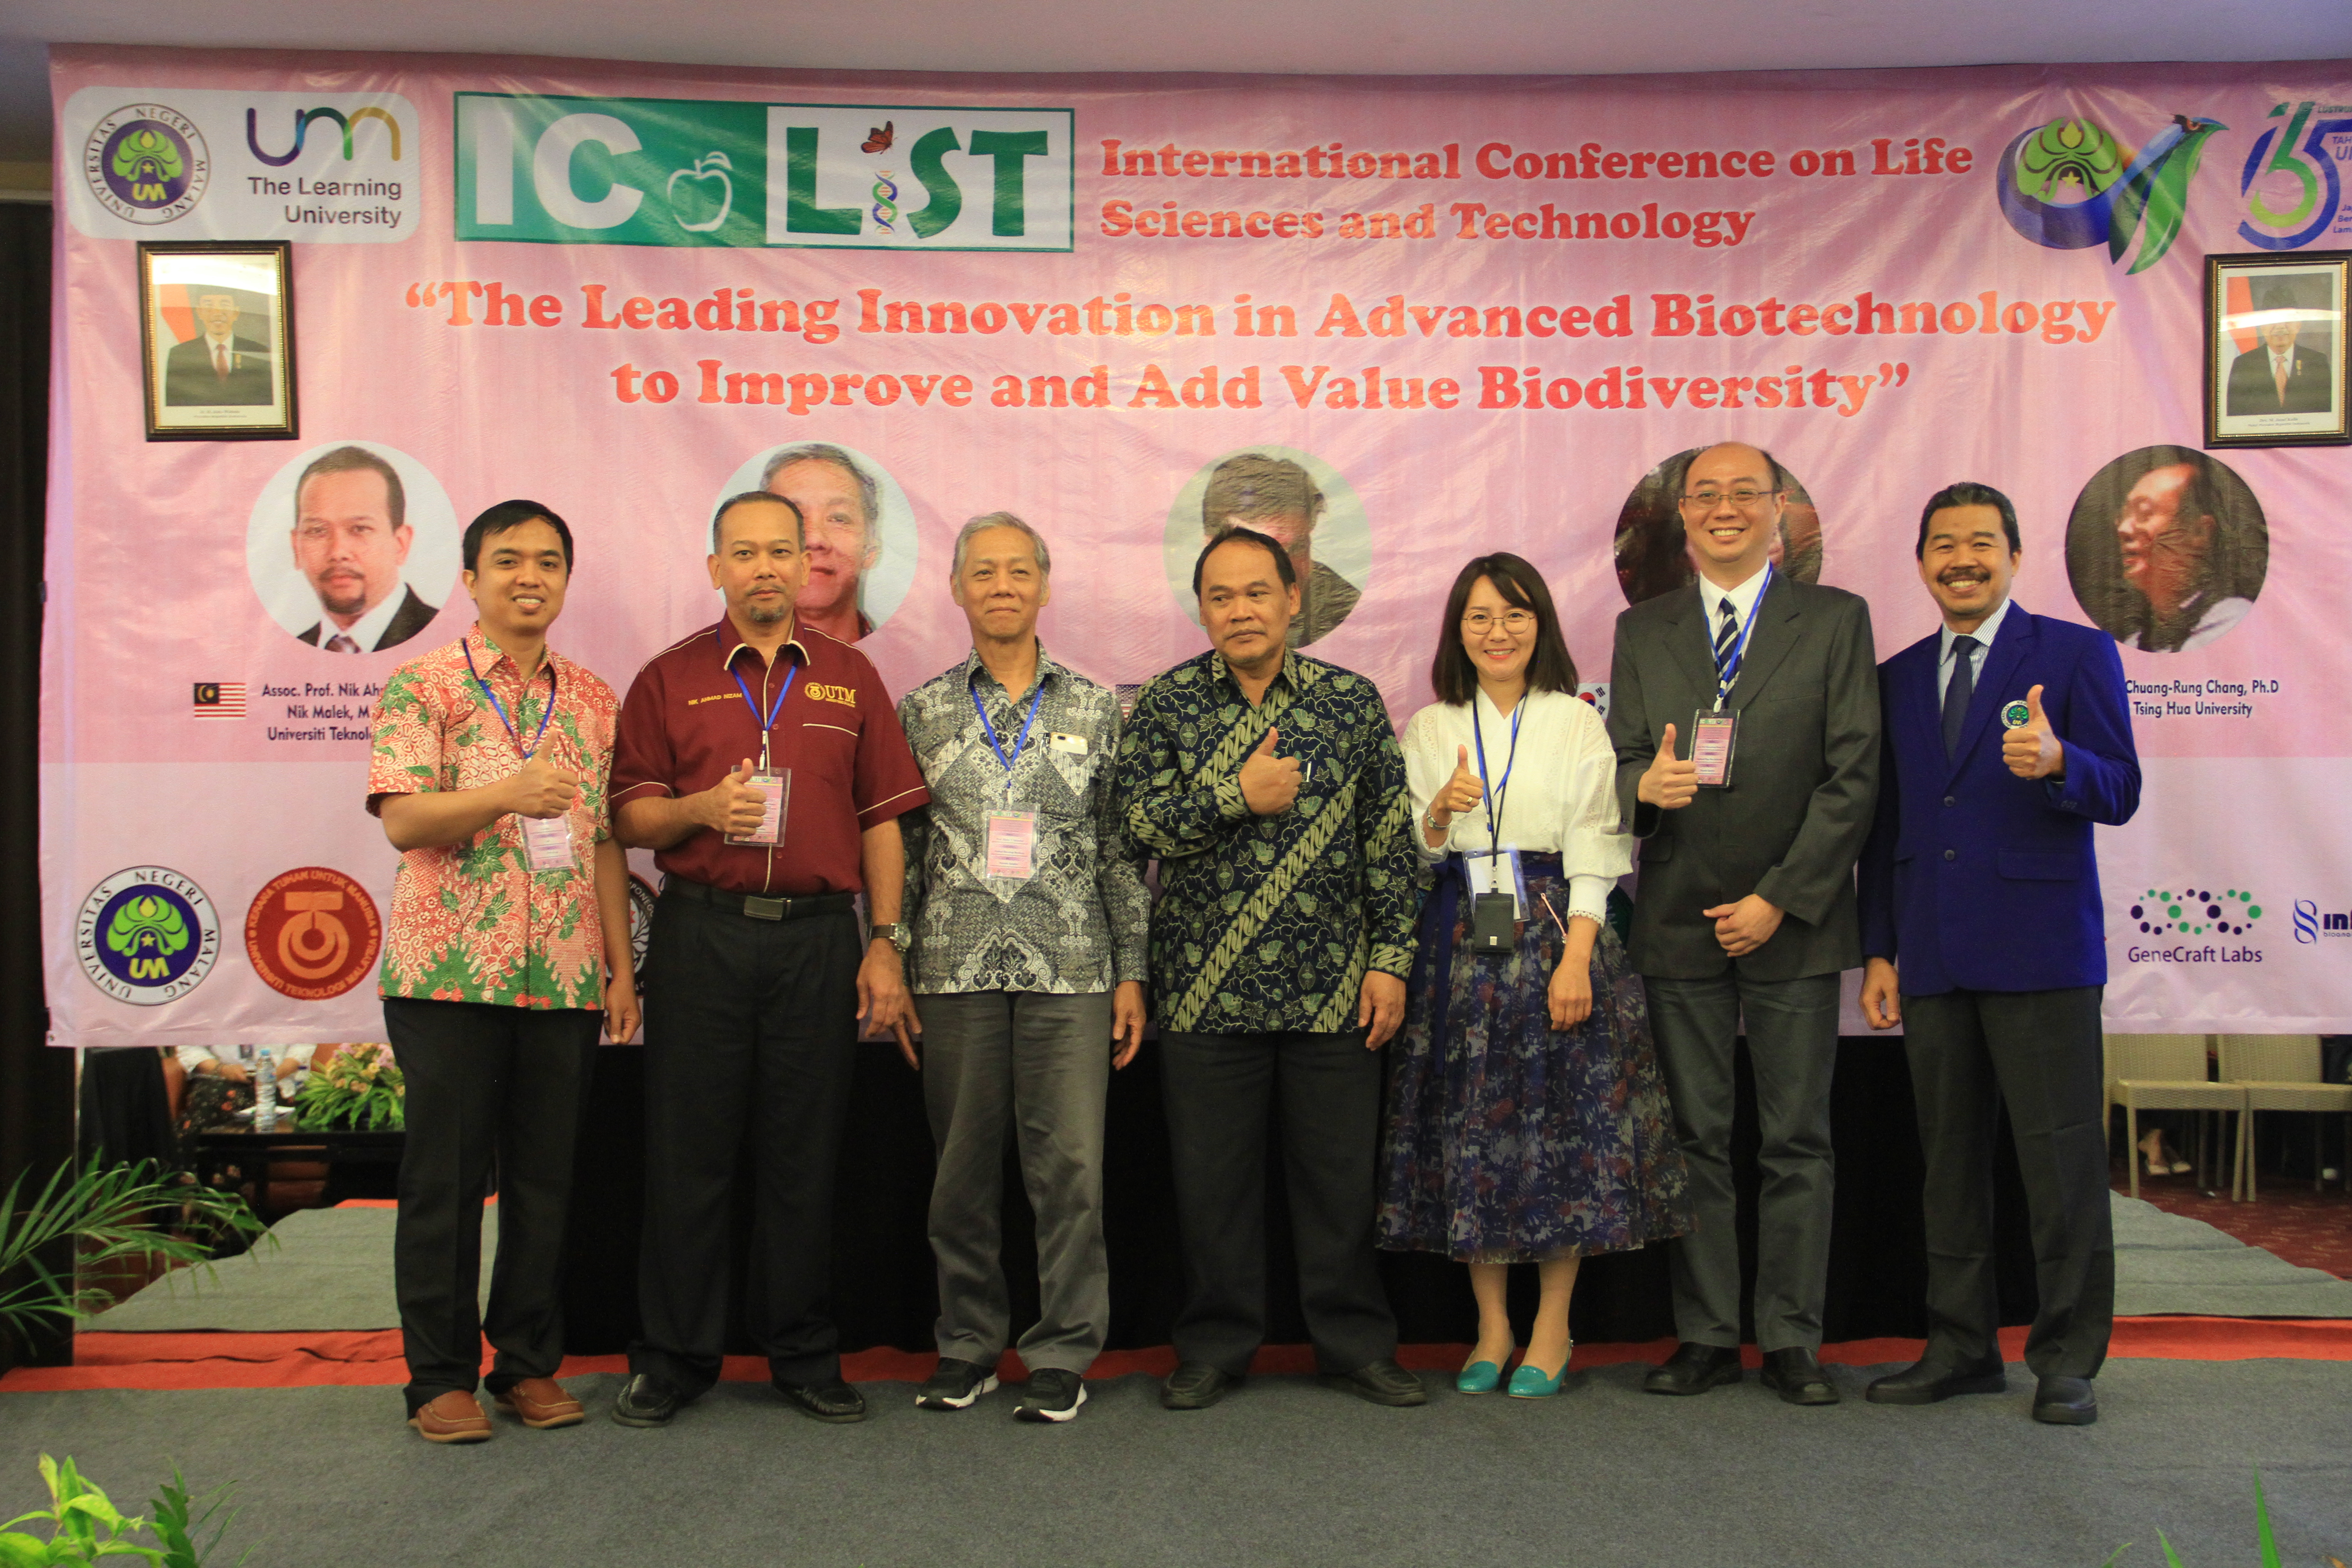 The 2nd International Conference on Life Sciences and Technology (ICoLiST) 2019